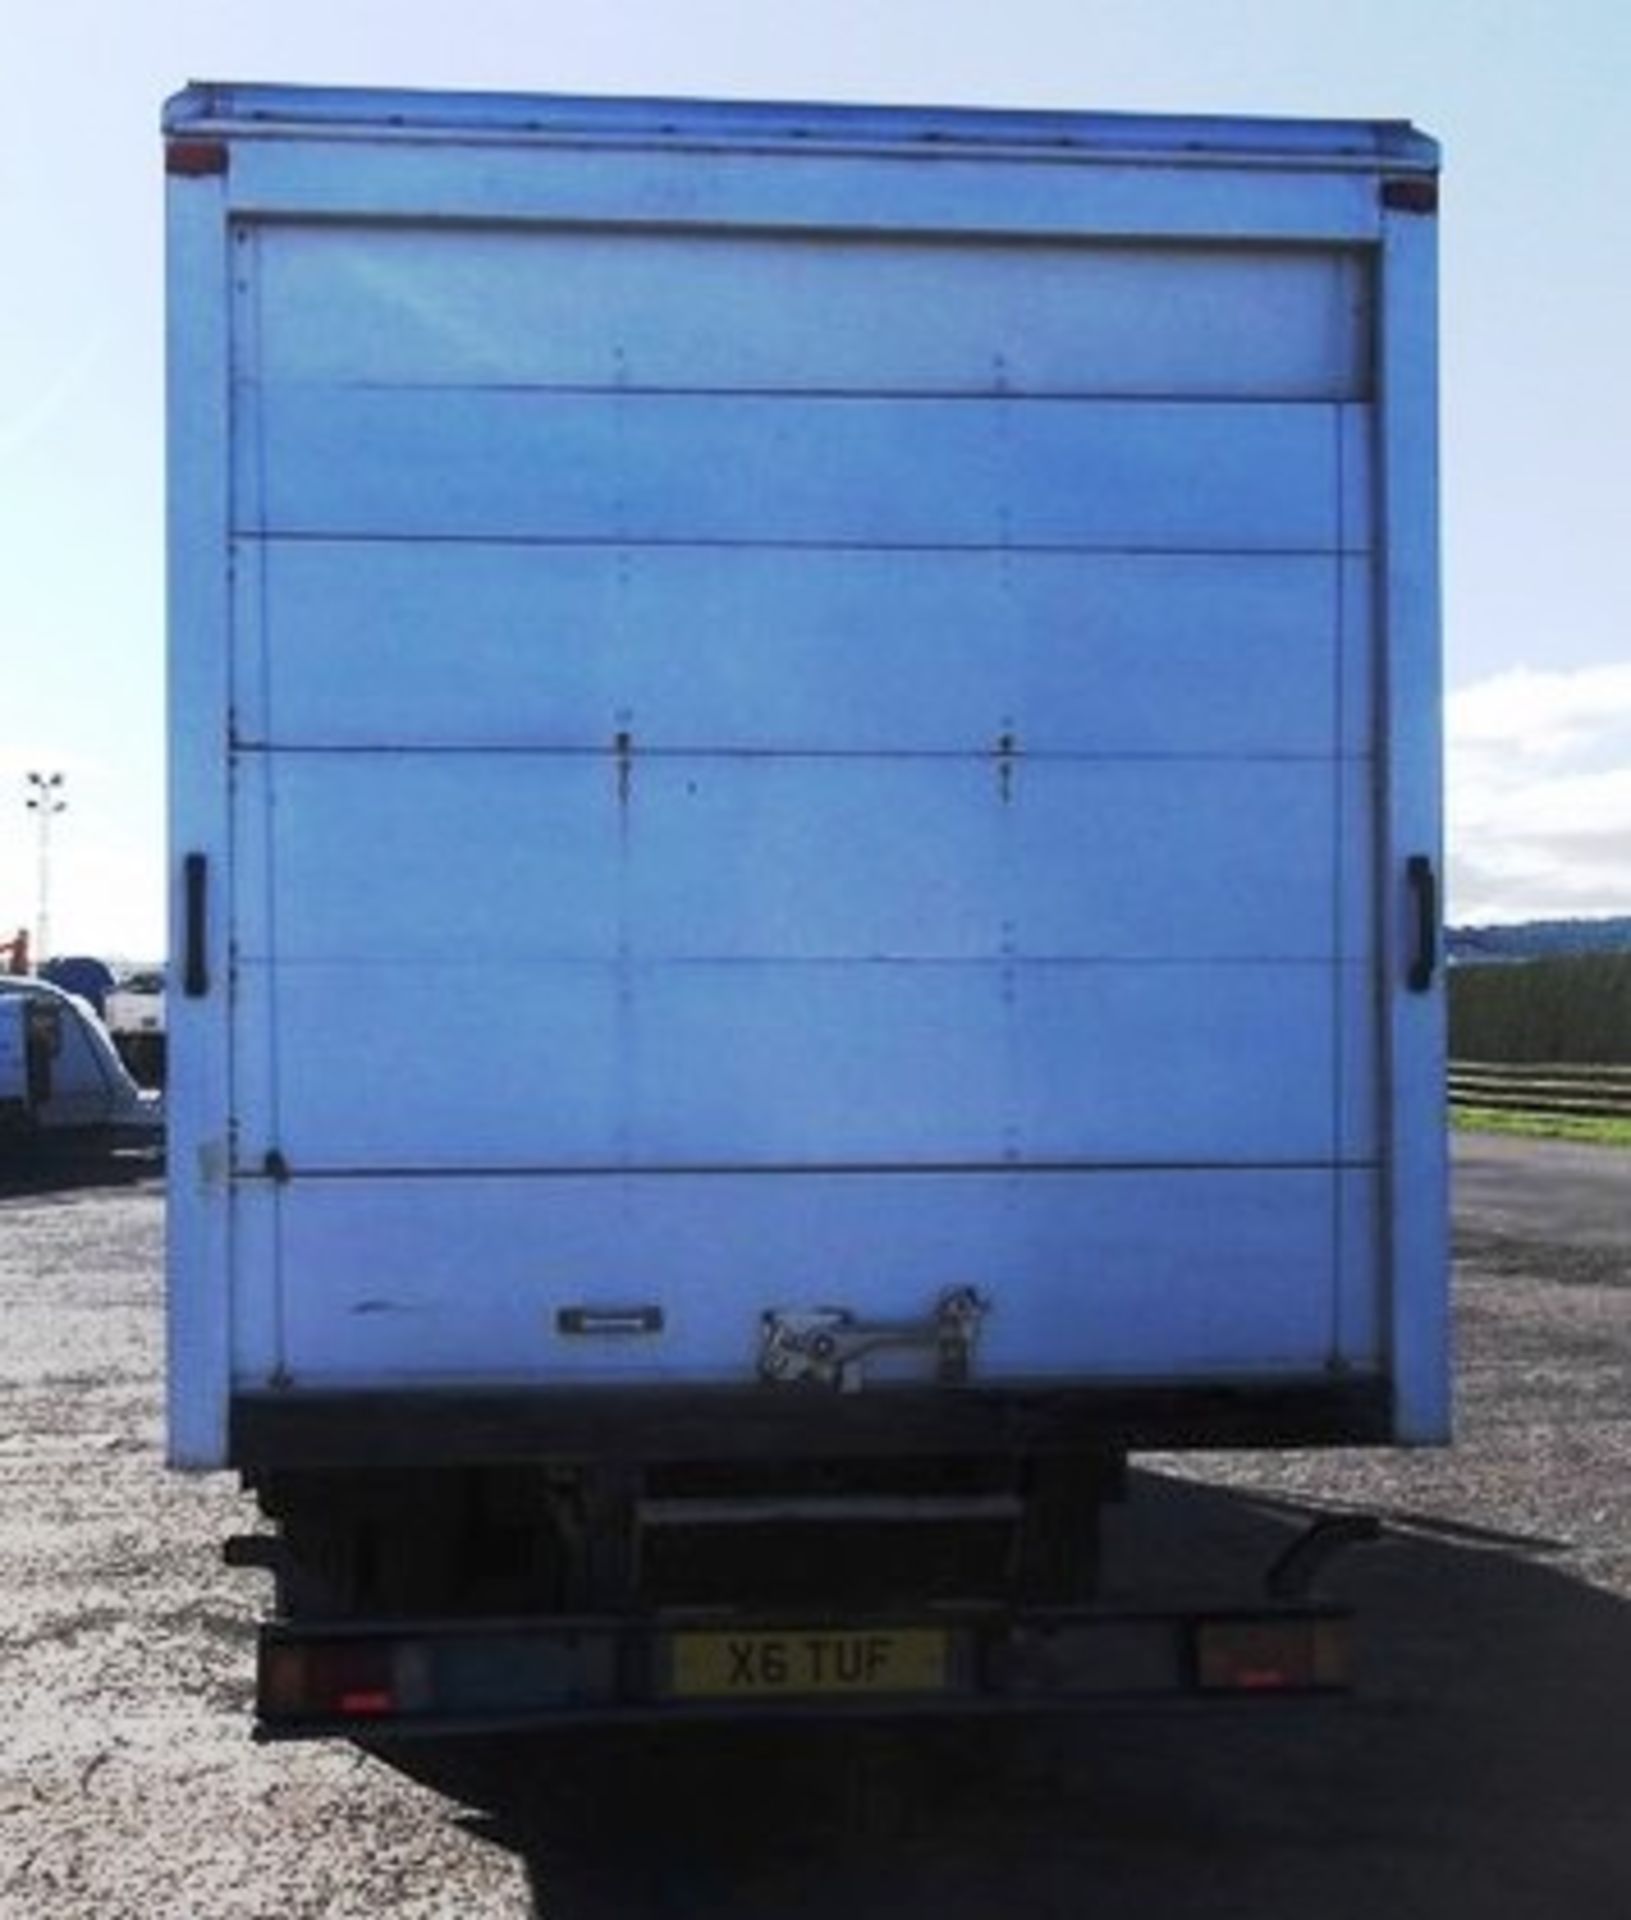 IVECO-FORD CARGO TECTOR - 3920cc
Body: 2 Dr Van
Color: White
First Reg: 05/03/2004
Doors: 2
MOT: - Image 14 of 20